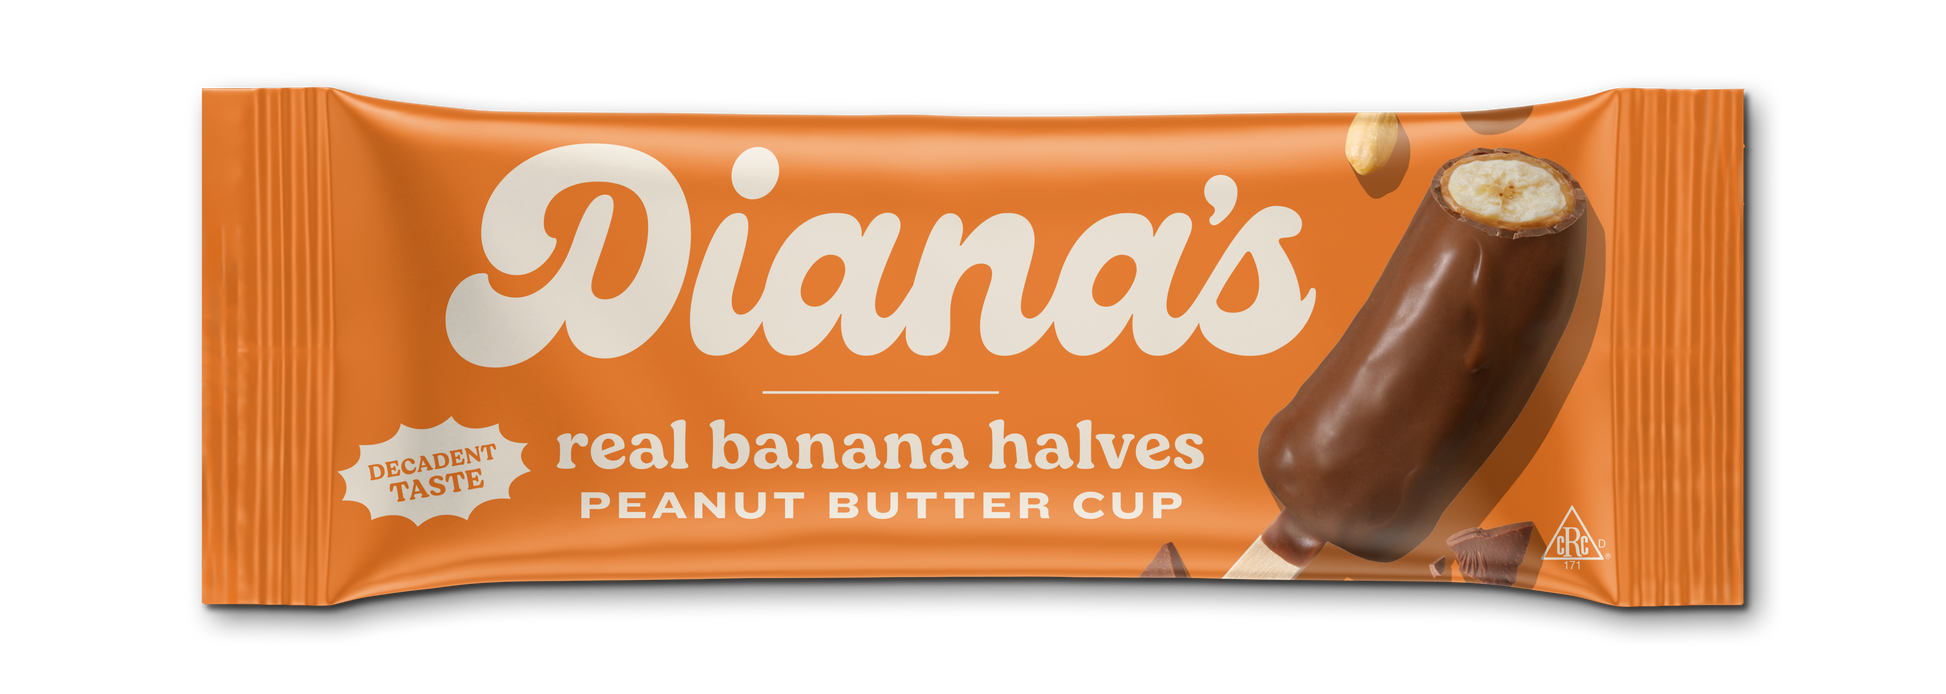 Diana's Peanut Butter Cup Banana Halves - 24 count case